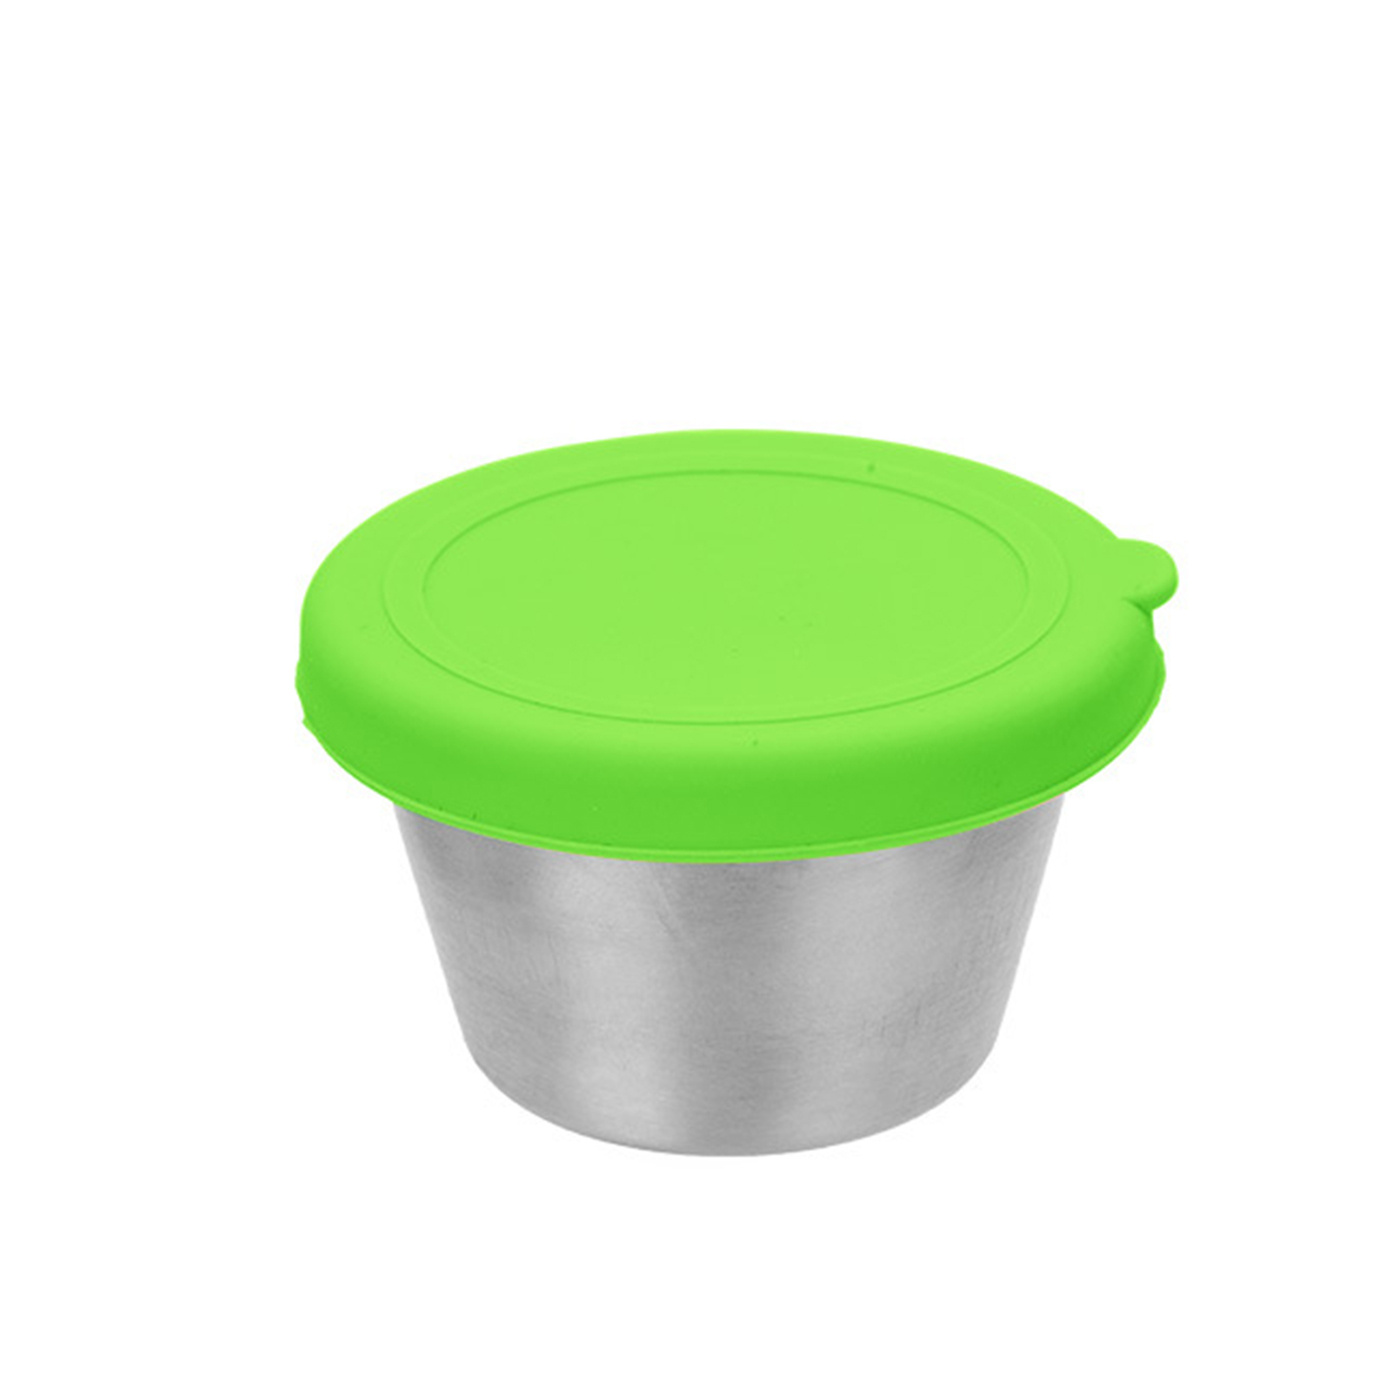 Small Condiment Containers With Lids Leakproof Reusable Stainless